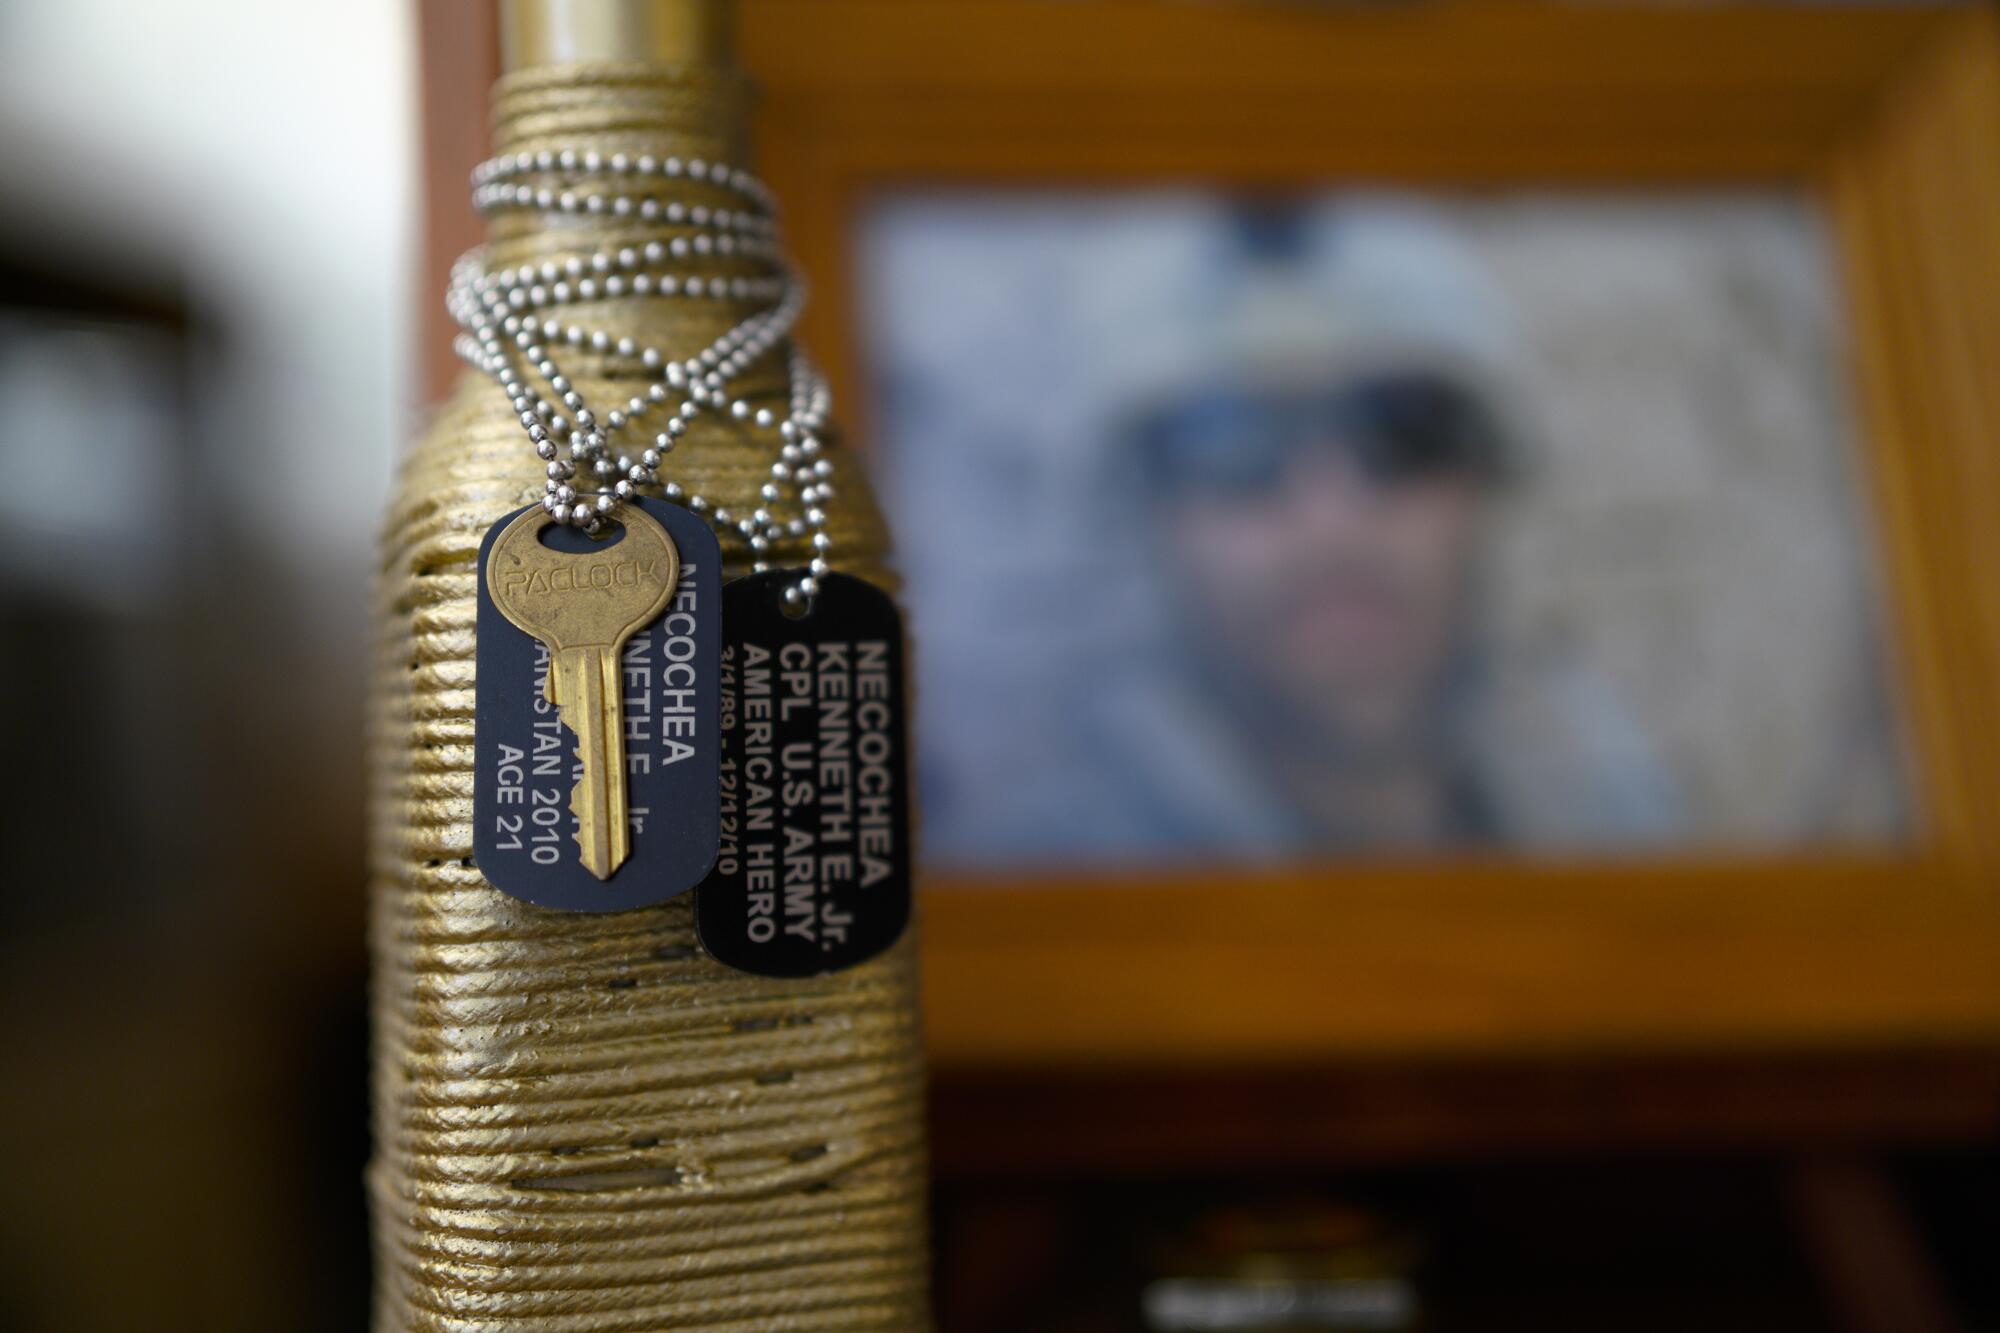 Two military dog tags and a key